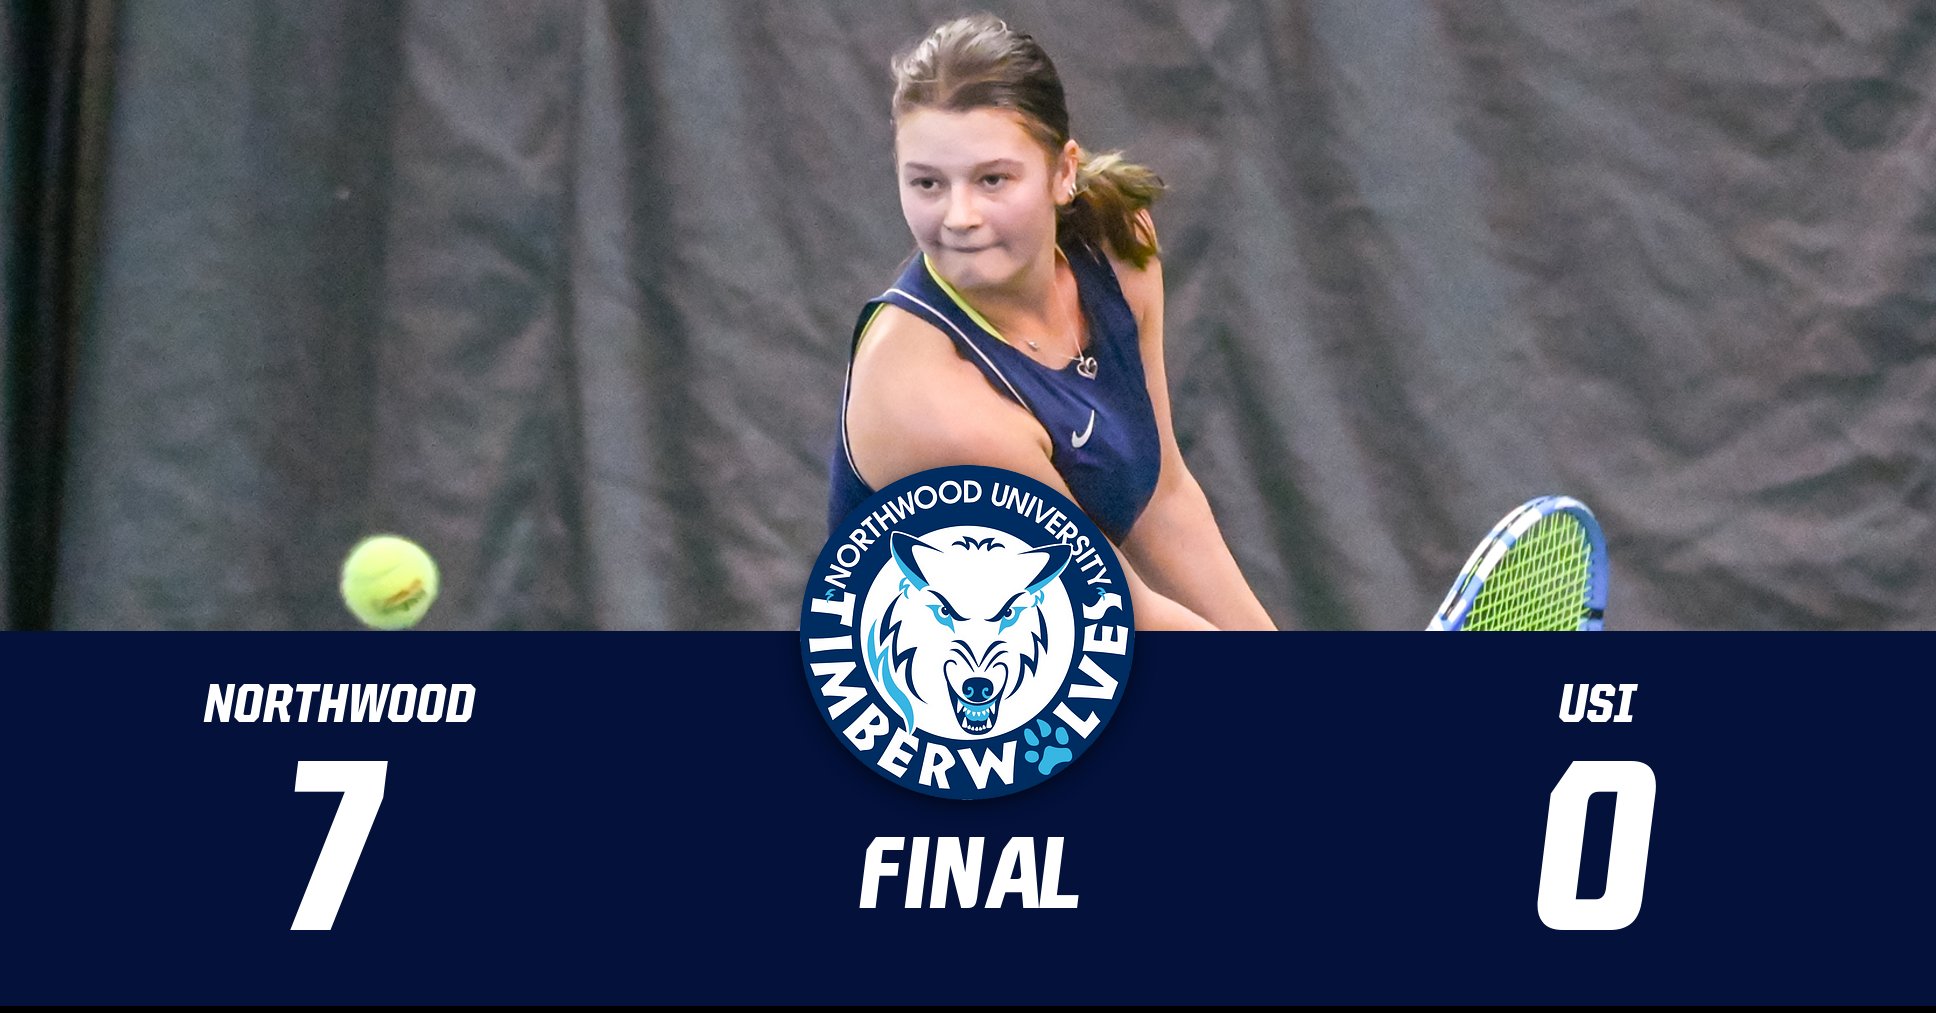 Women's Tennis Opens Season With 7-0 Win Over Southern Indiana